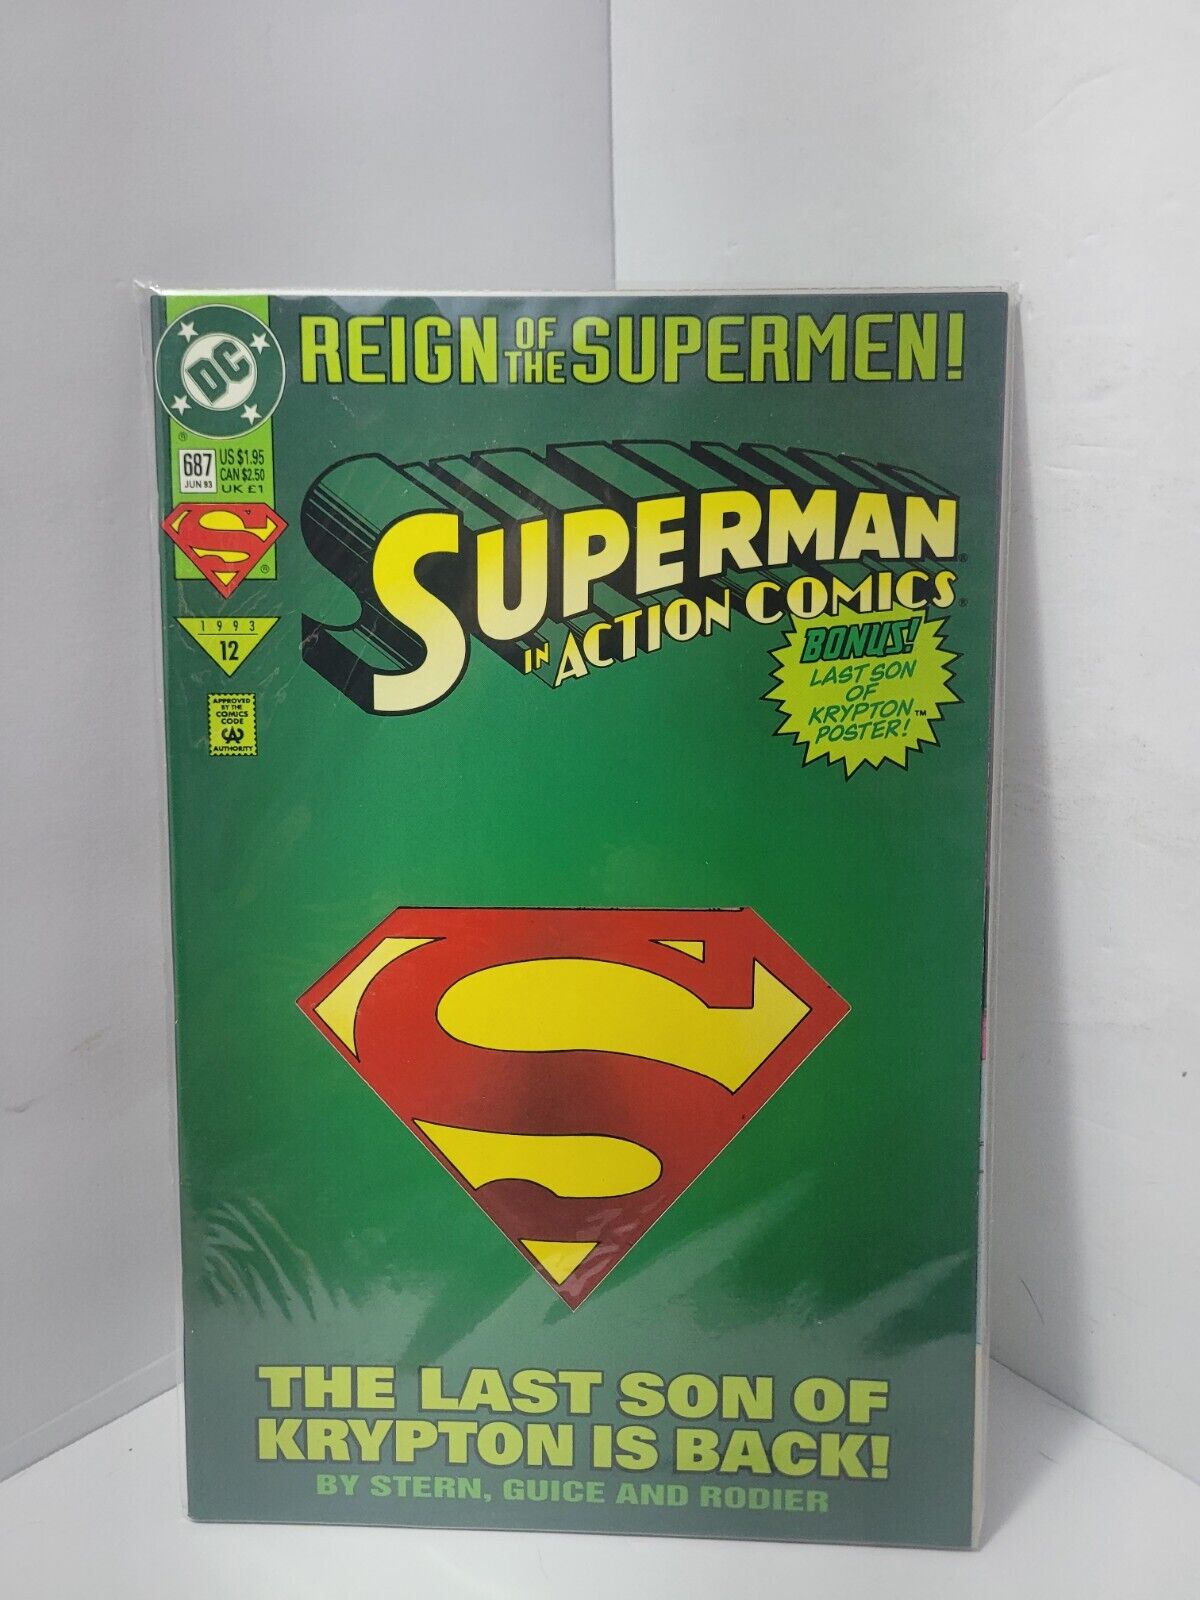 #12 DC 1993 SUPERMAN in ACTION COMIC- Issue 687 REIGN OF THE SUPERMEN